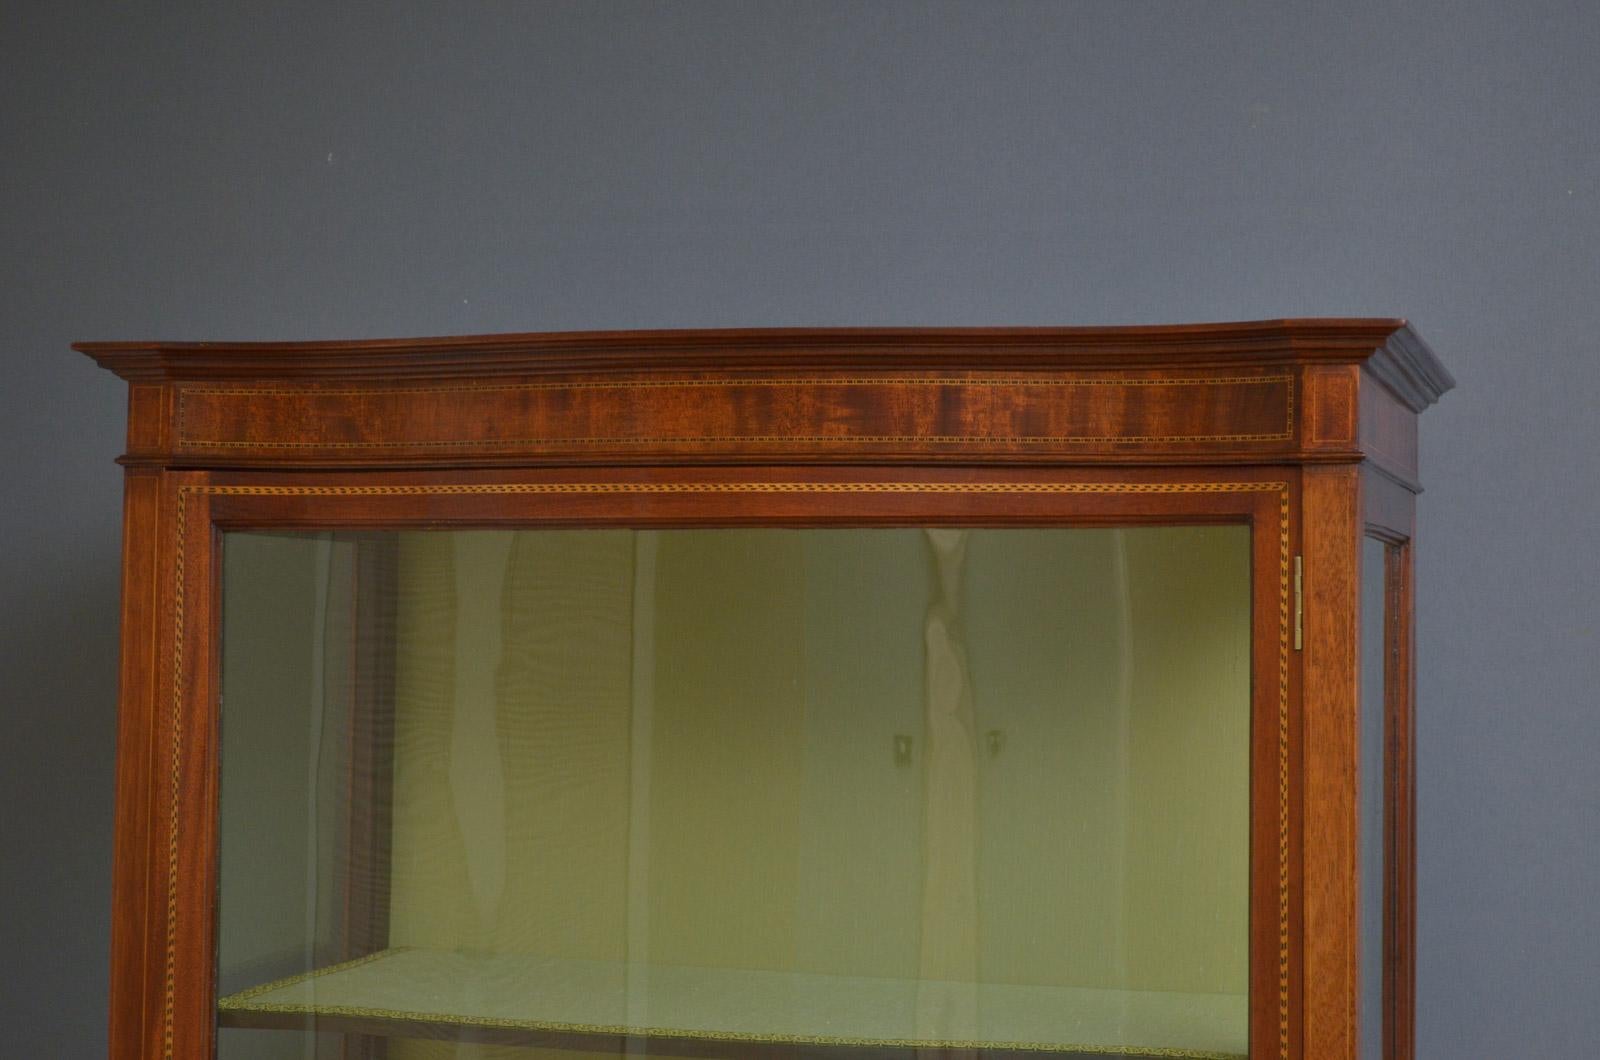 Sn4441, slim Edwardian, mahogany display cabinet, vitrine of serpentine outline, having molded cornice above a satinwood inlaid frieze, single door enclosing 3 shelves and glazed sides, all standing on elegant legs terminating in spade feet. This